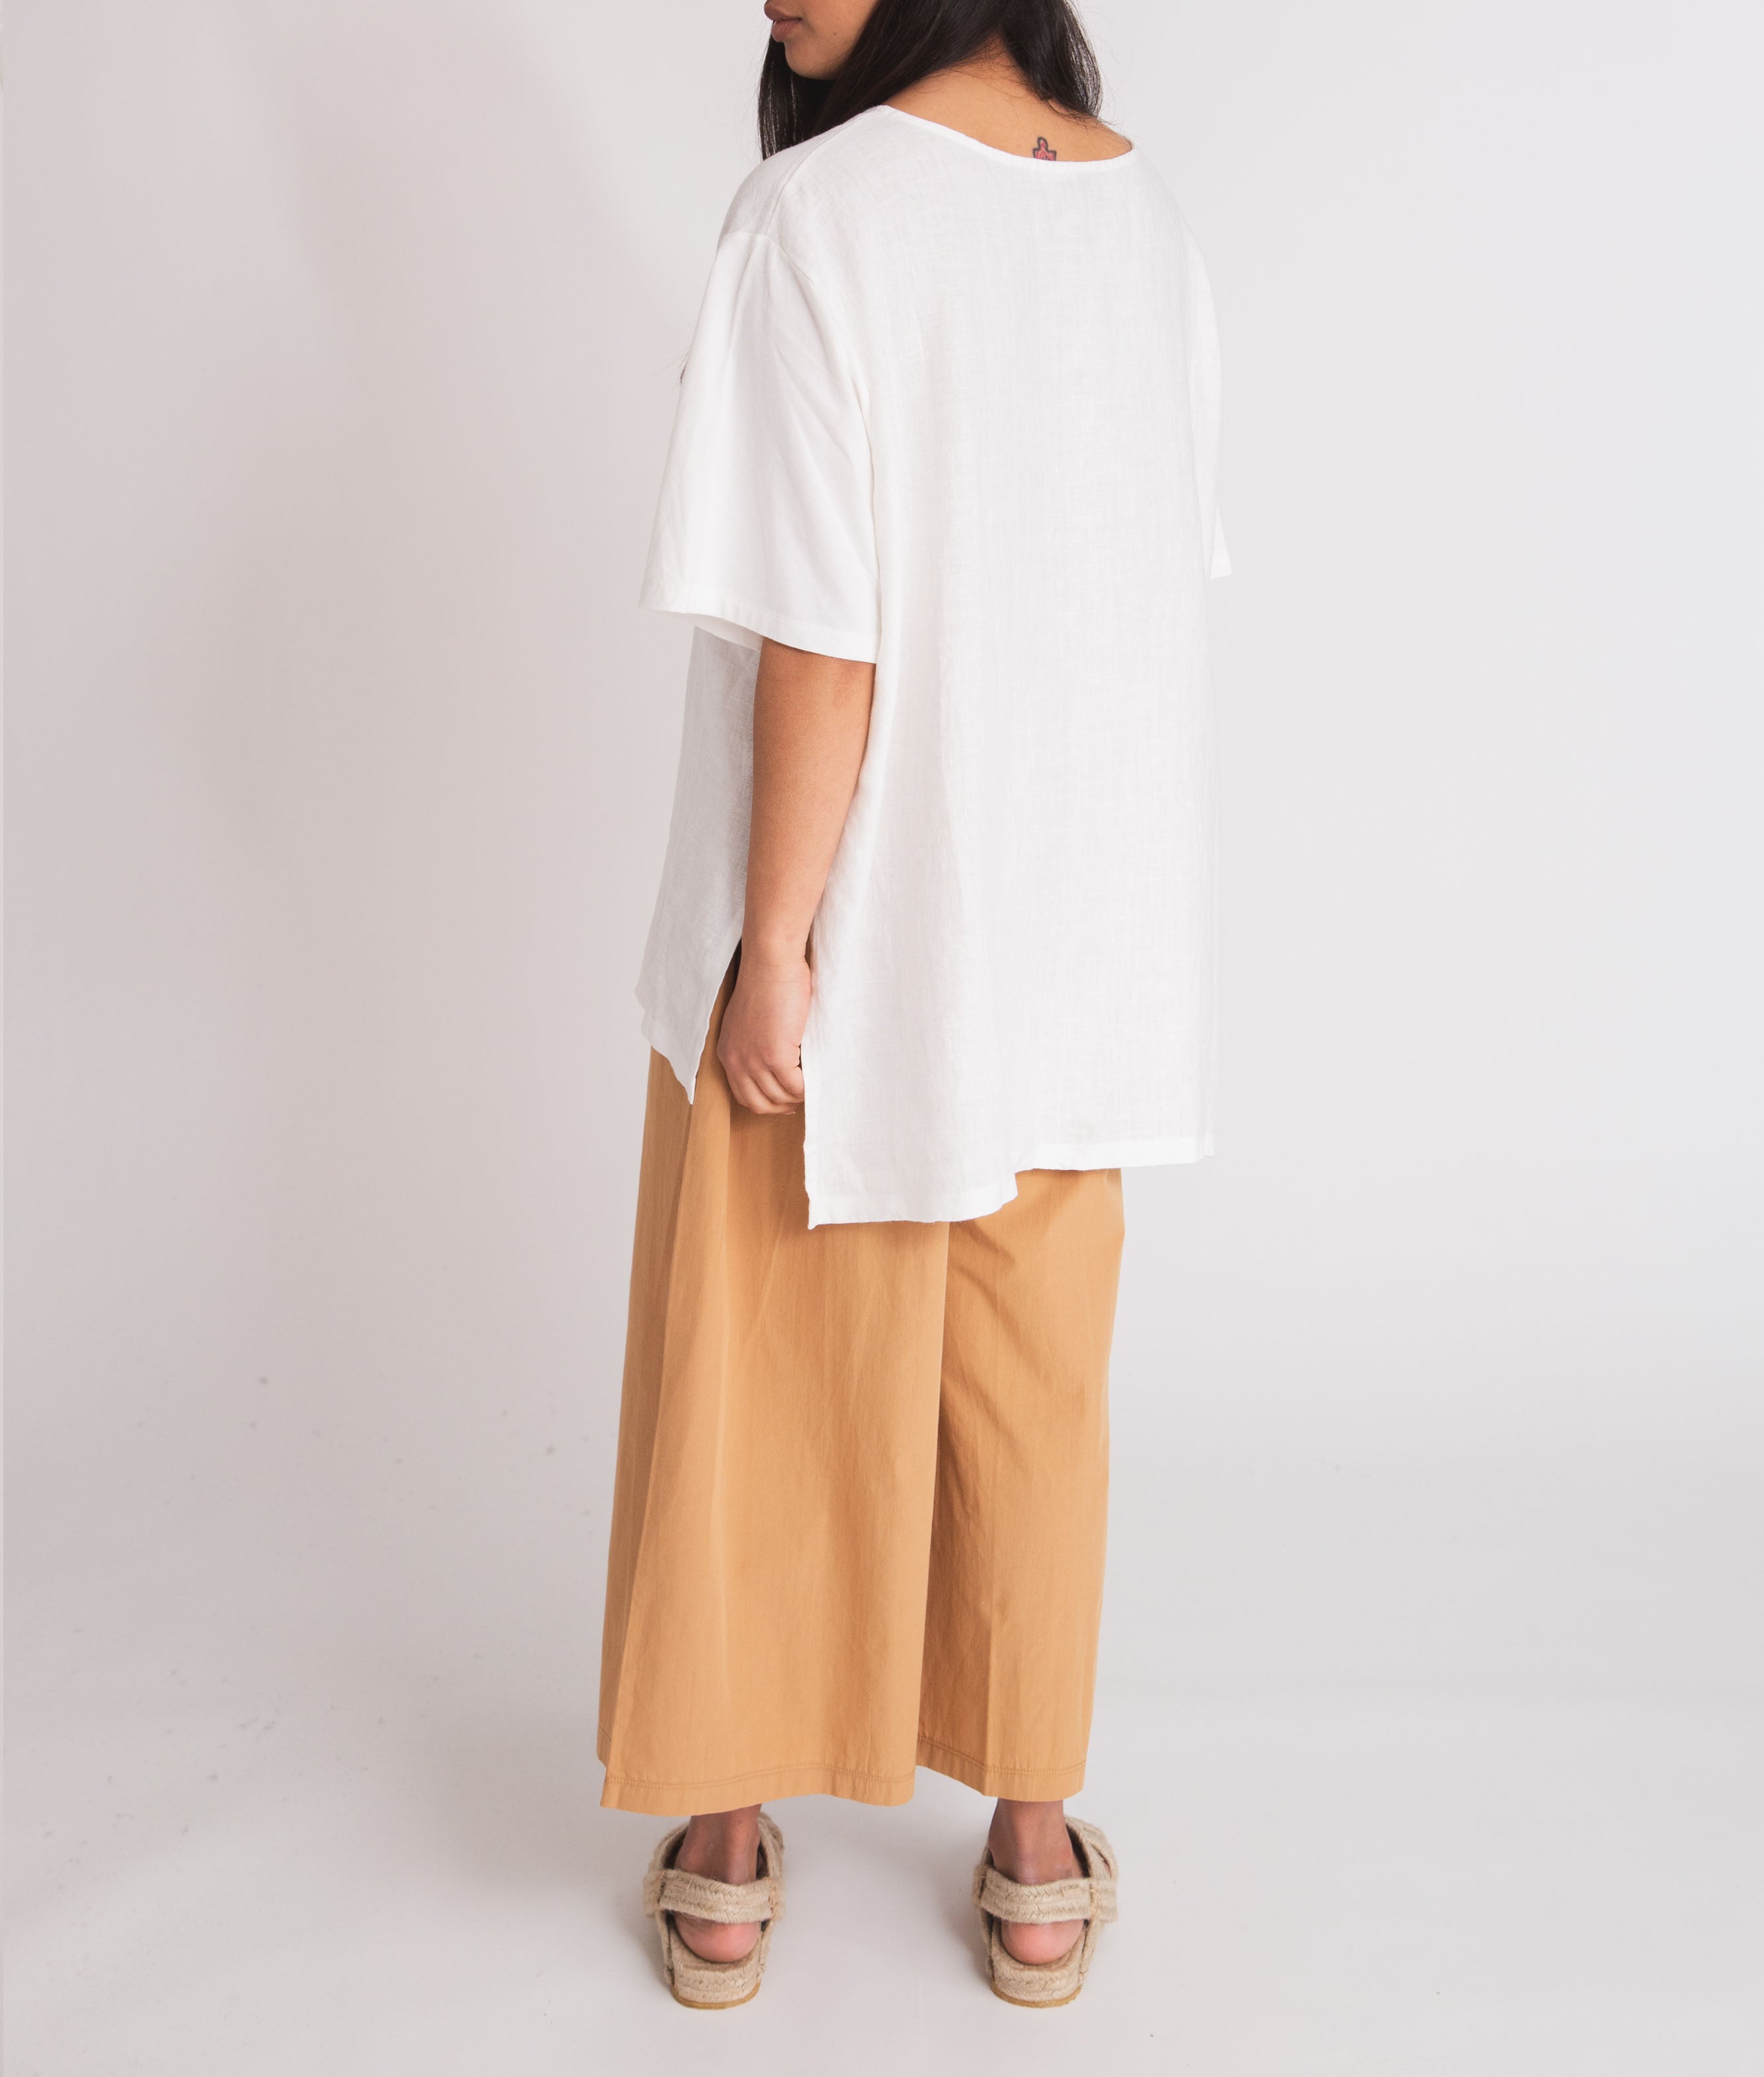 Adrienne Organic Cotton Trousers In Camel